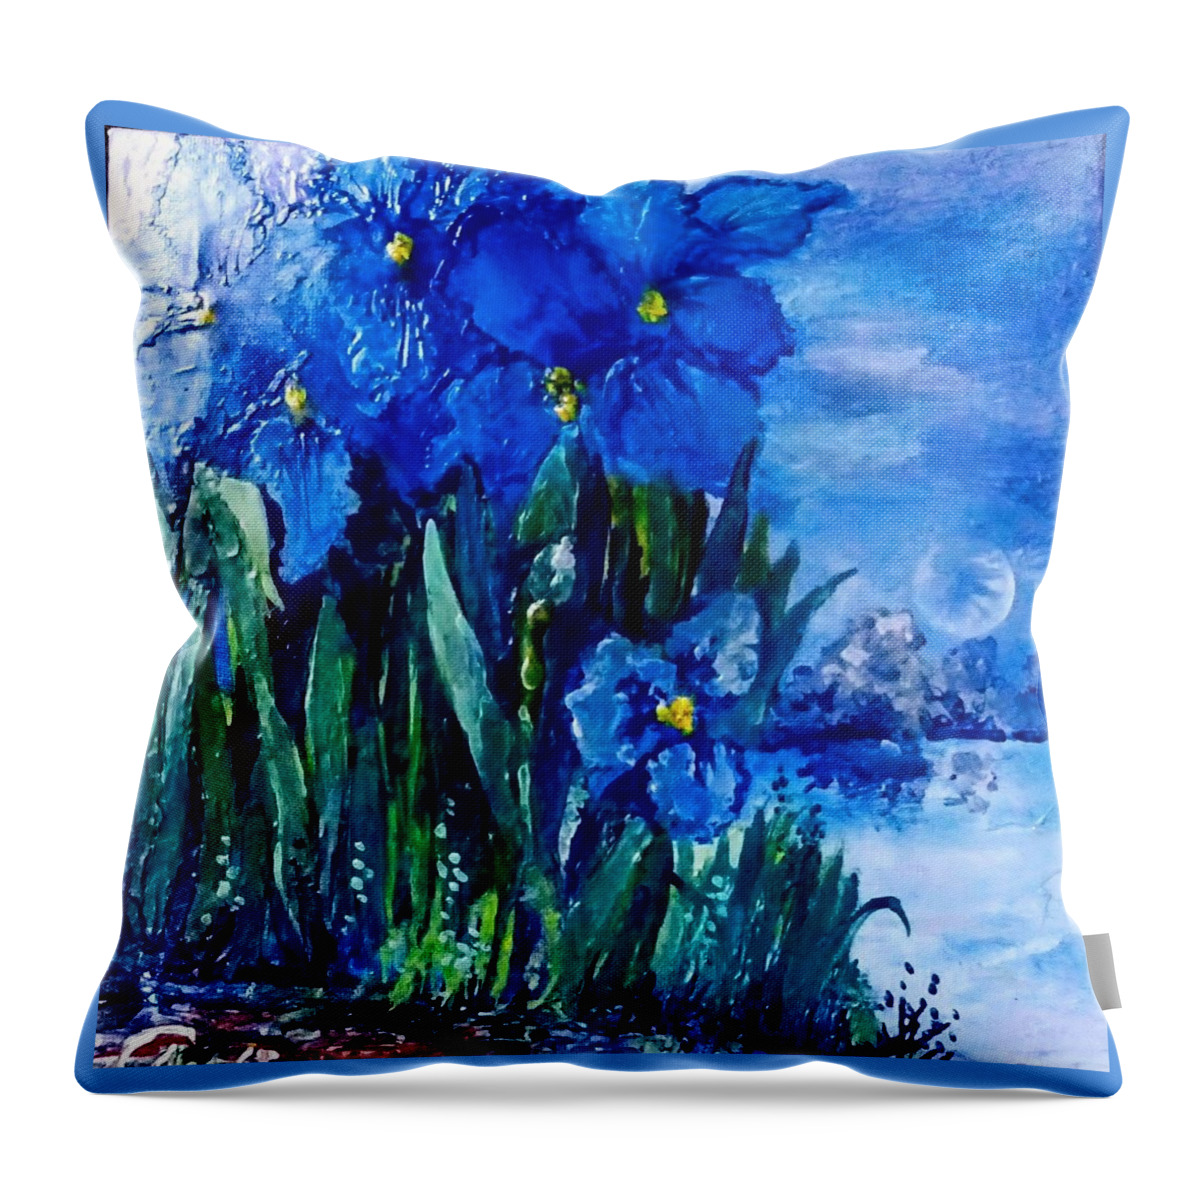 Moonrise.irises Throw Pillow featuring the painting Moonrise #2 by Angelina Whittaker Cook